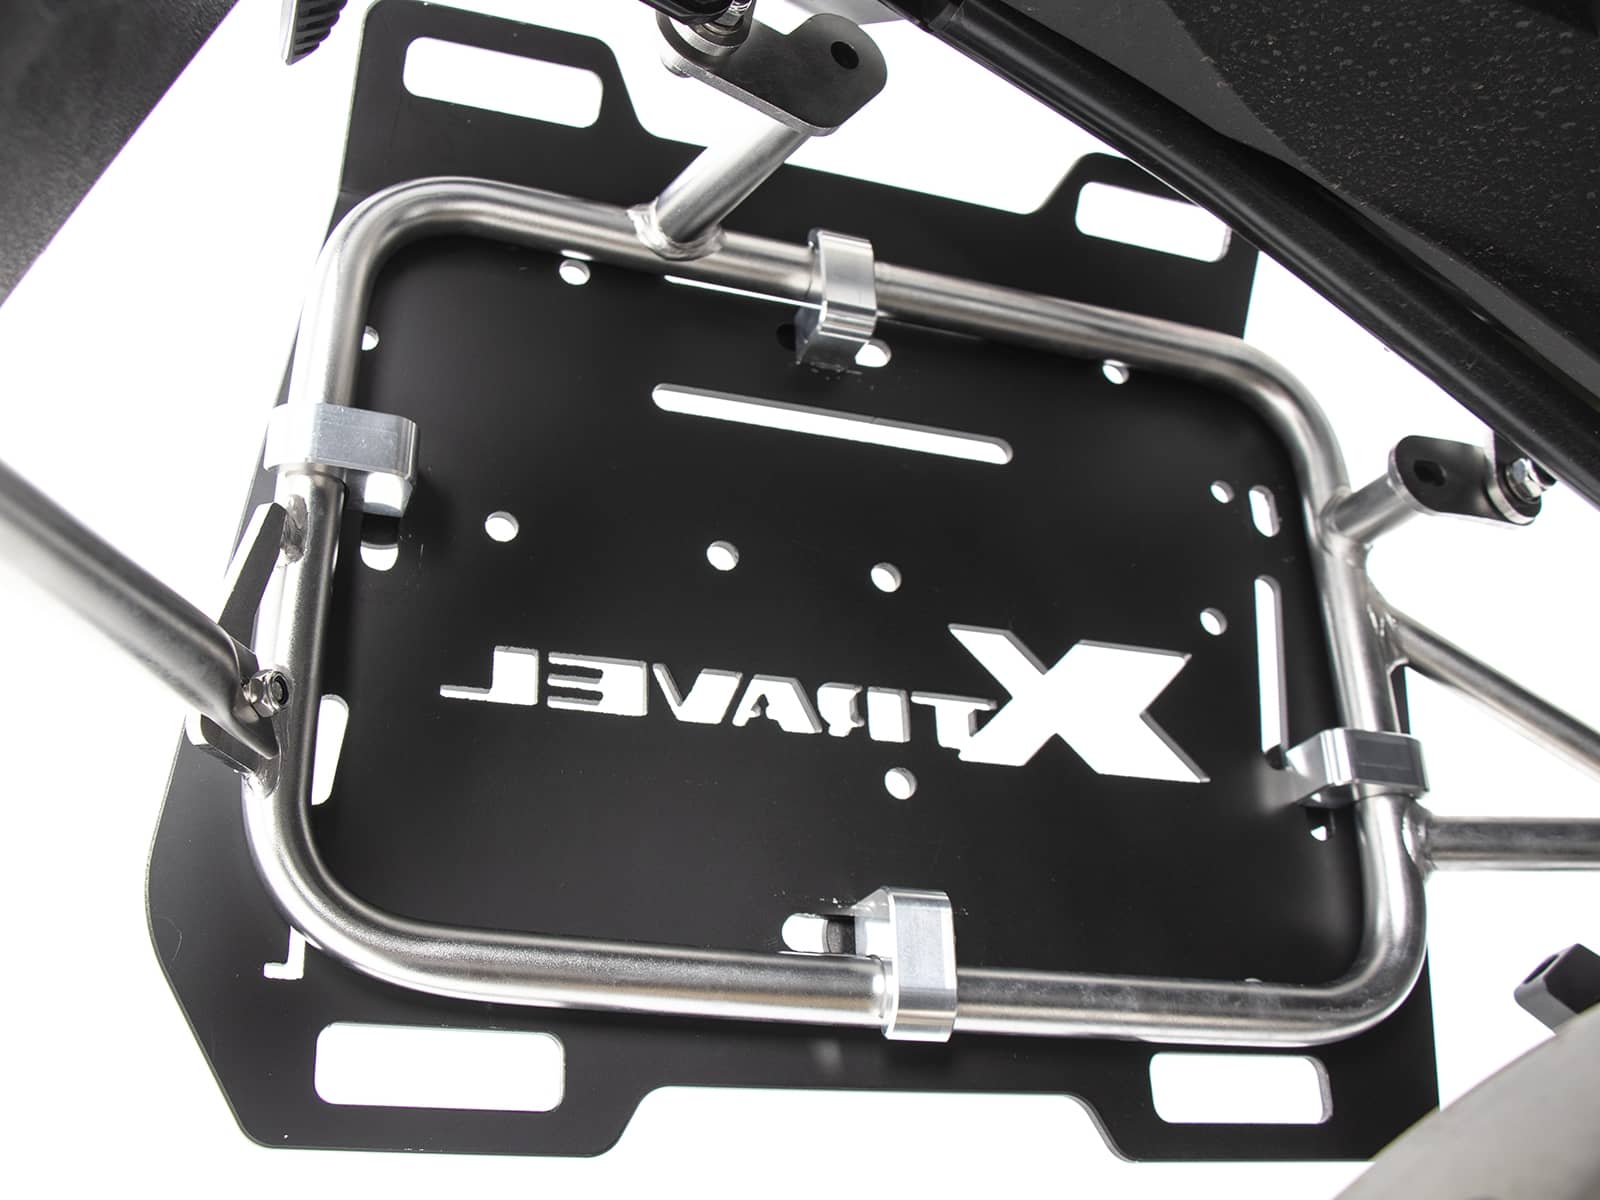 Mounting kit for Xtravel Basic universal holding plates to Touratech sidecase carrier